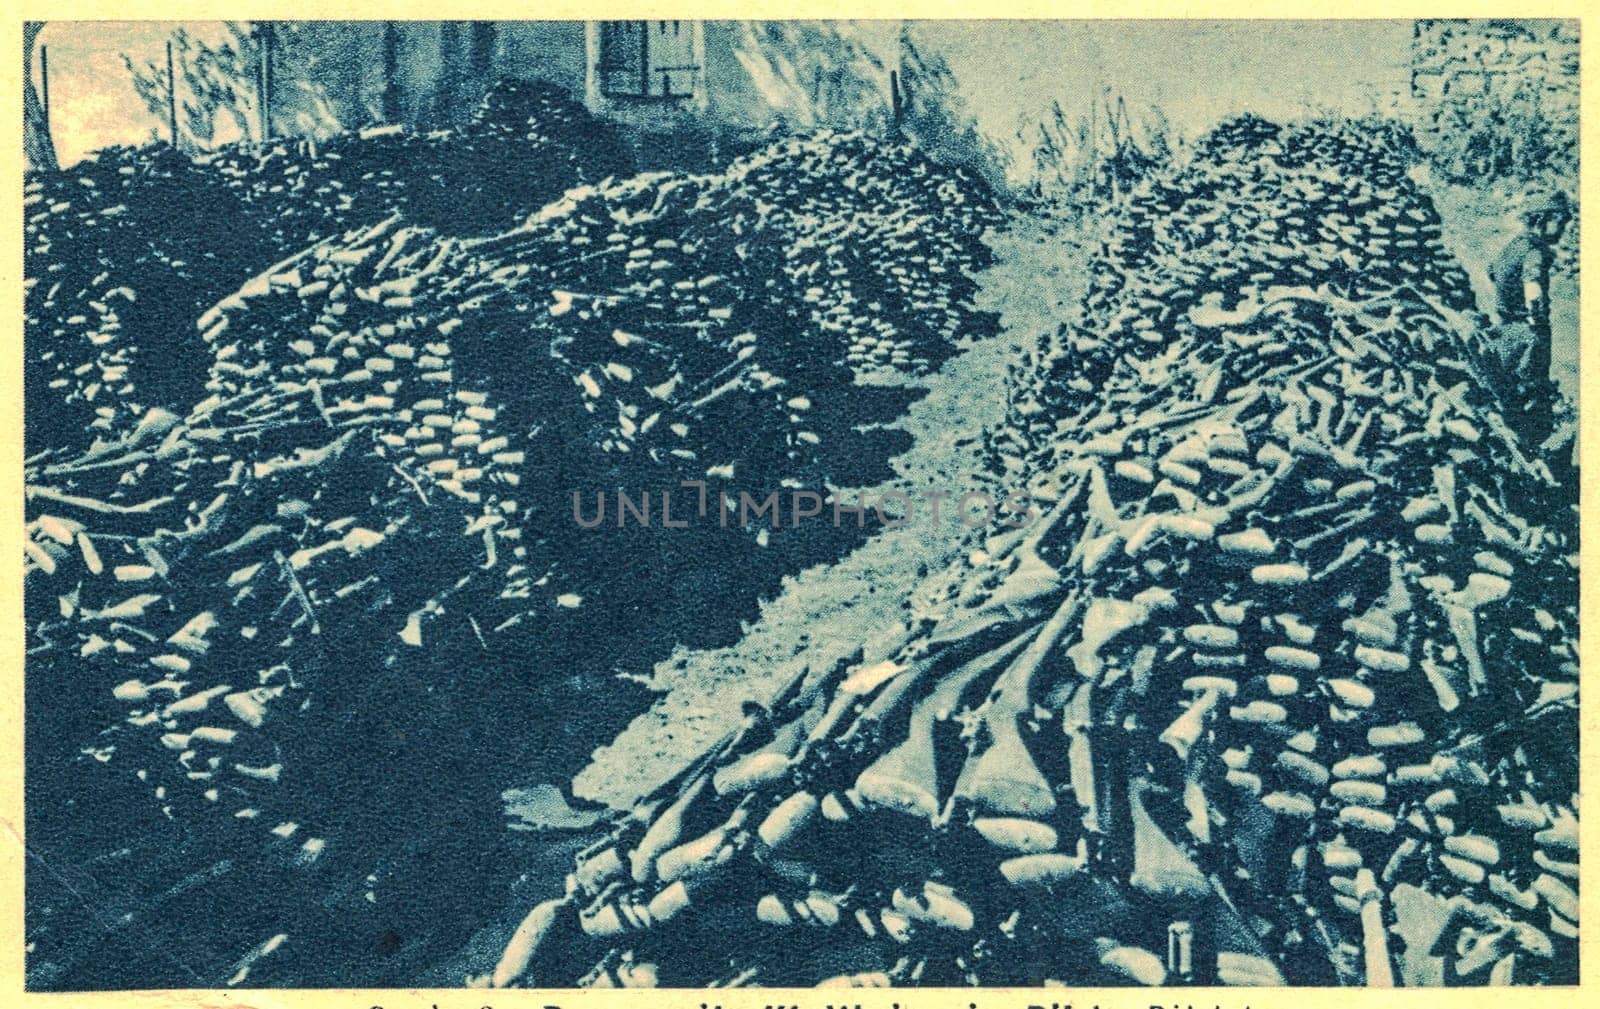 Spoils of war gained Nazi Germany in France. Rifles on piles. by roman_nerud